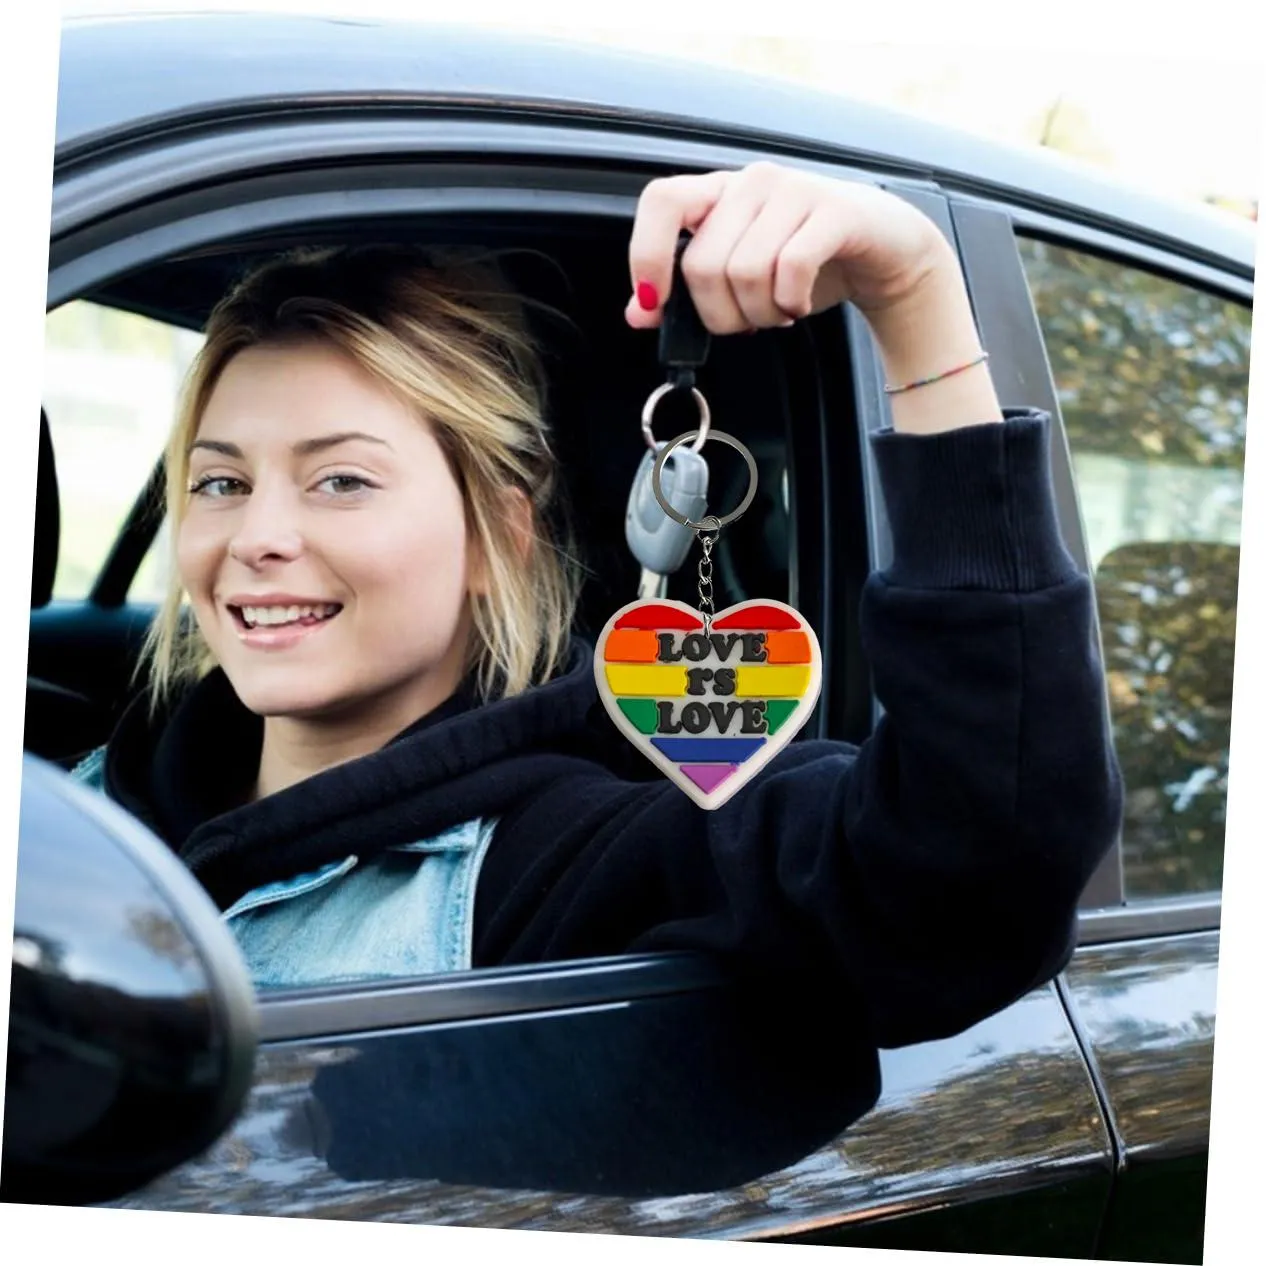 rainbow 24 keychain key purse handbag charms for women car bag keyring chain accessories backpack and gift valentines day suitable schoolbag keychains pendant bags